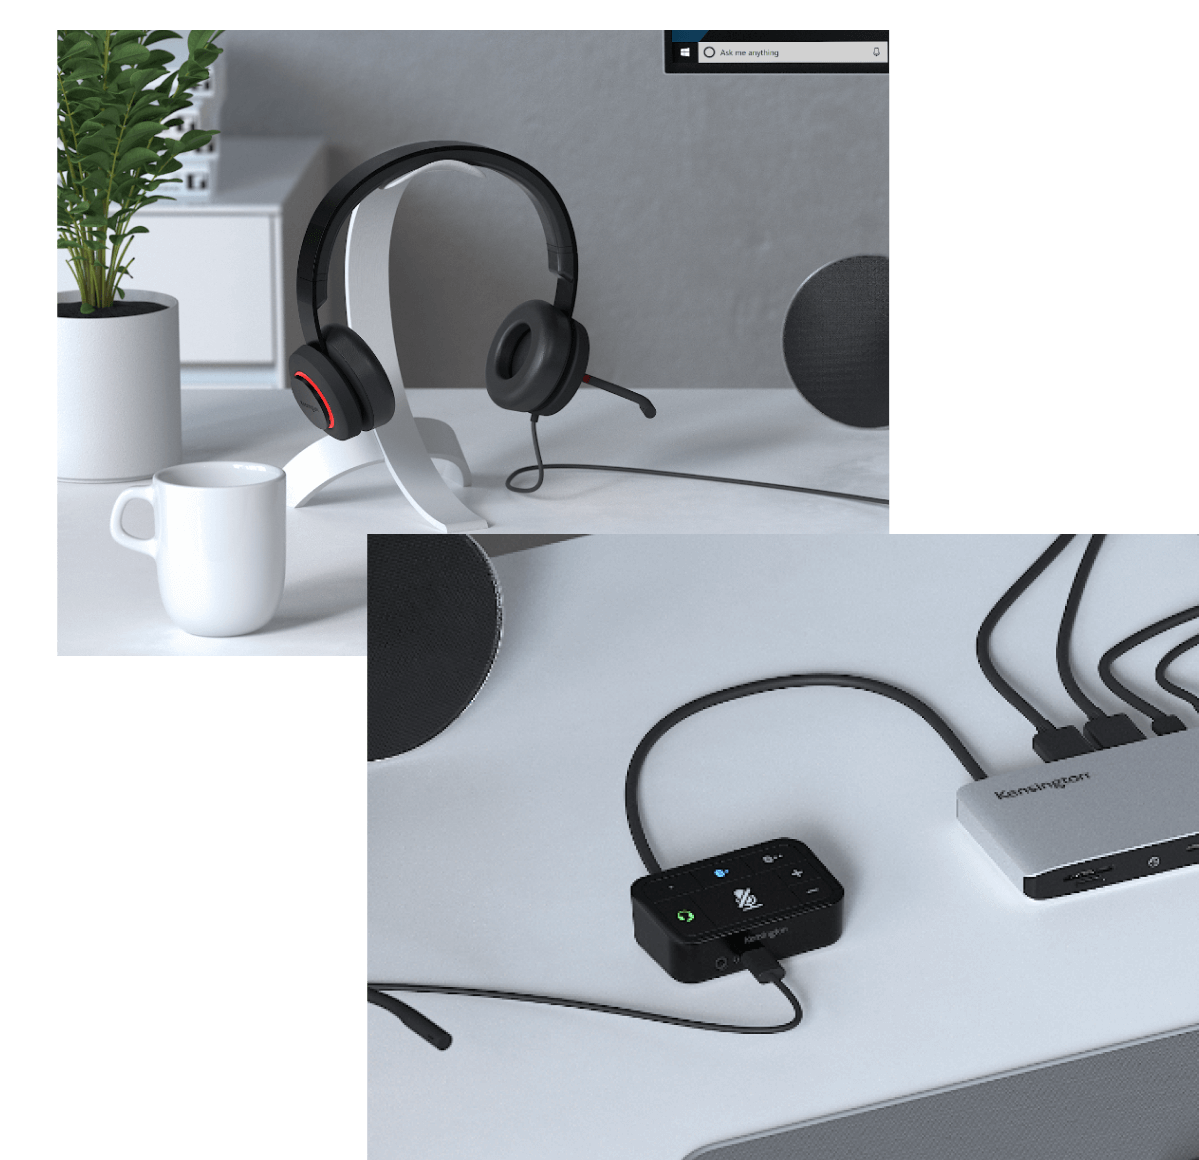 Kensington H2000 Headset and Audio Switch on desk